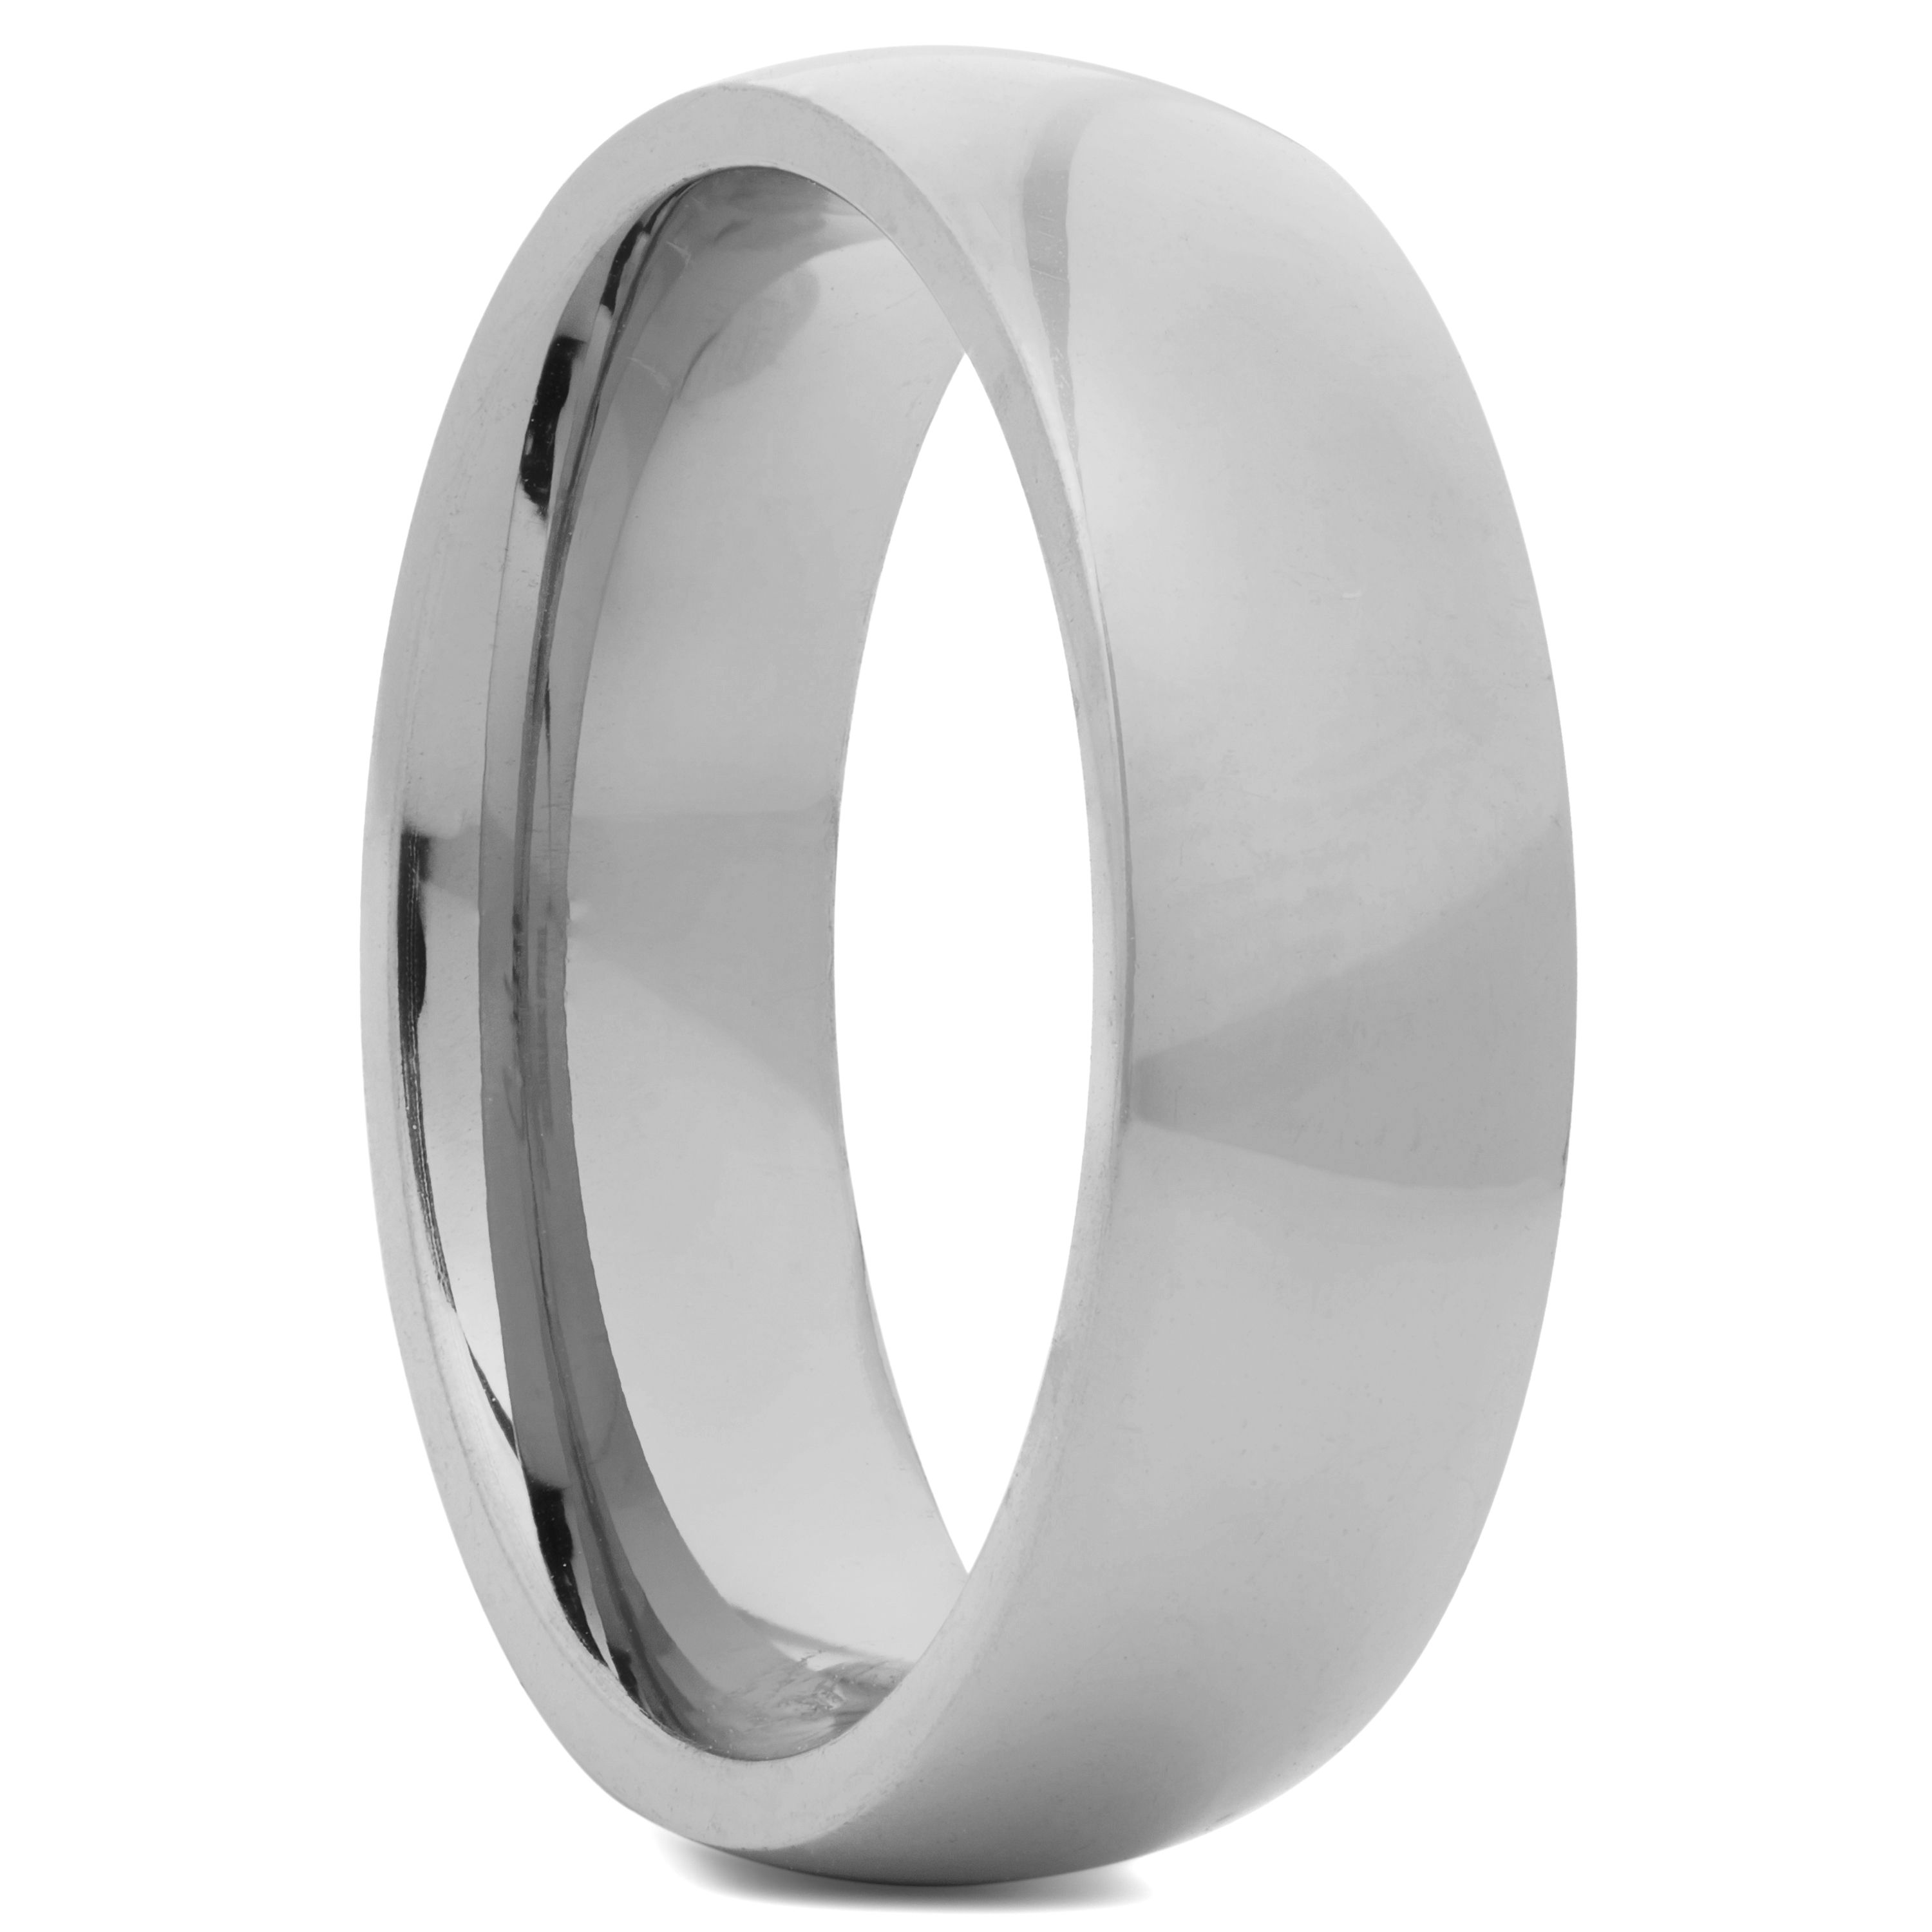 Stylish White Striped Silver Stainless Steel Ring | F44-May-113 | Cilory.com